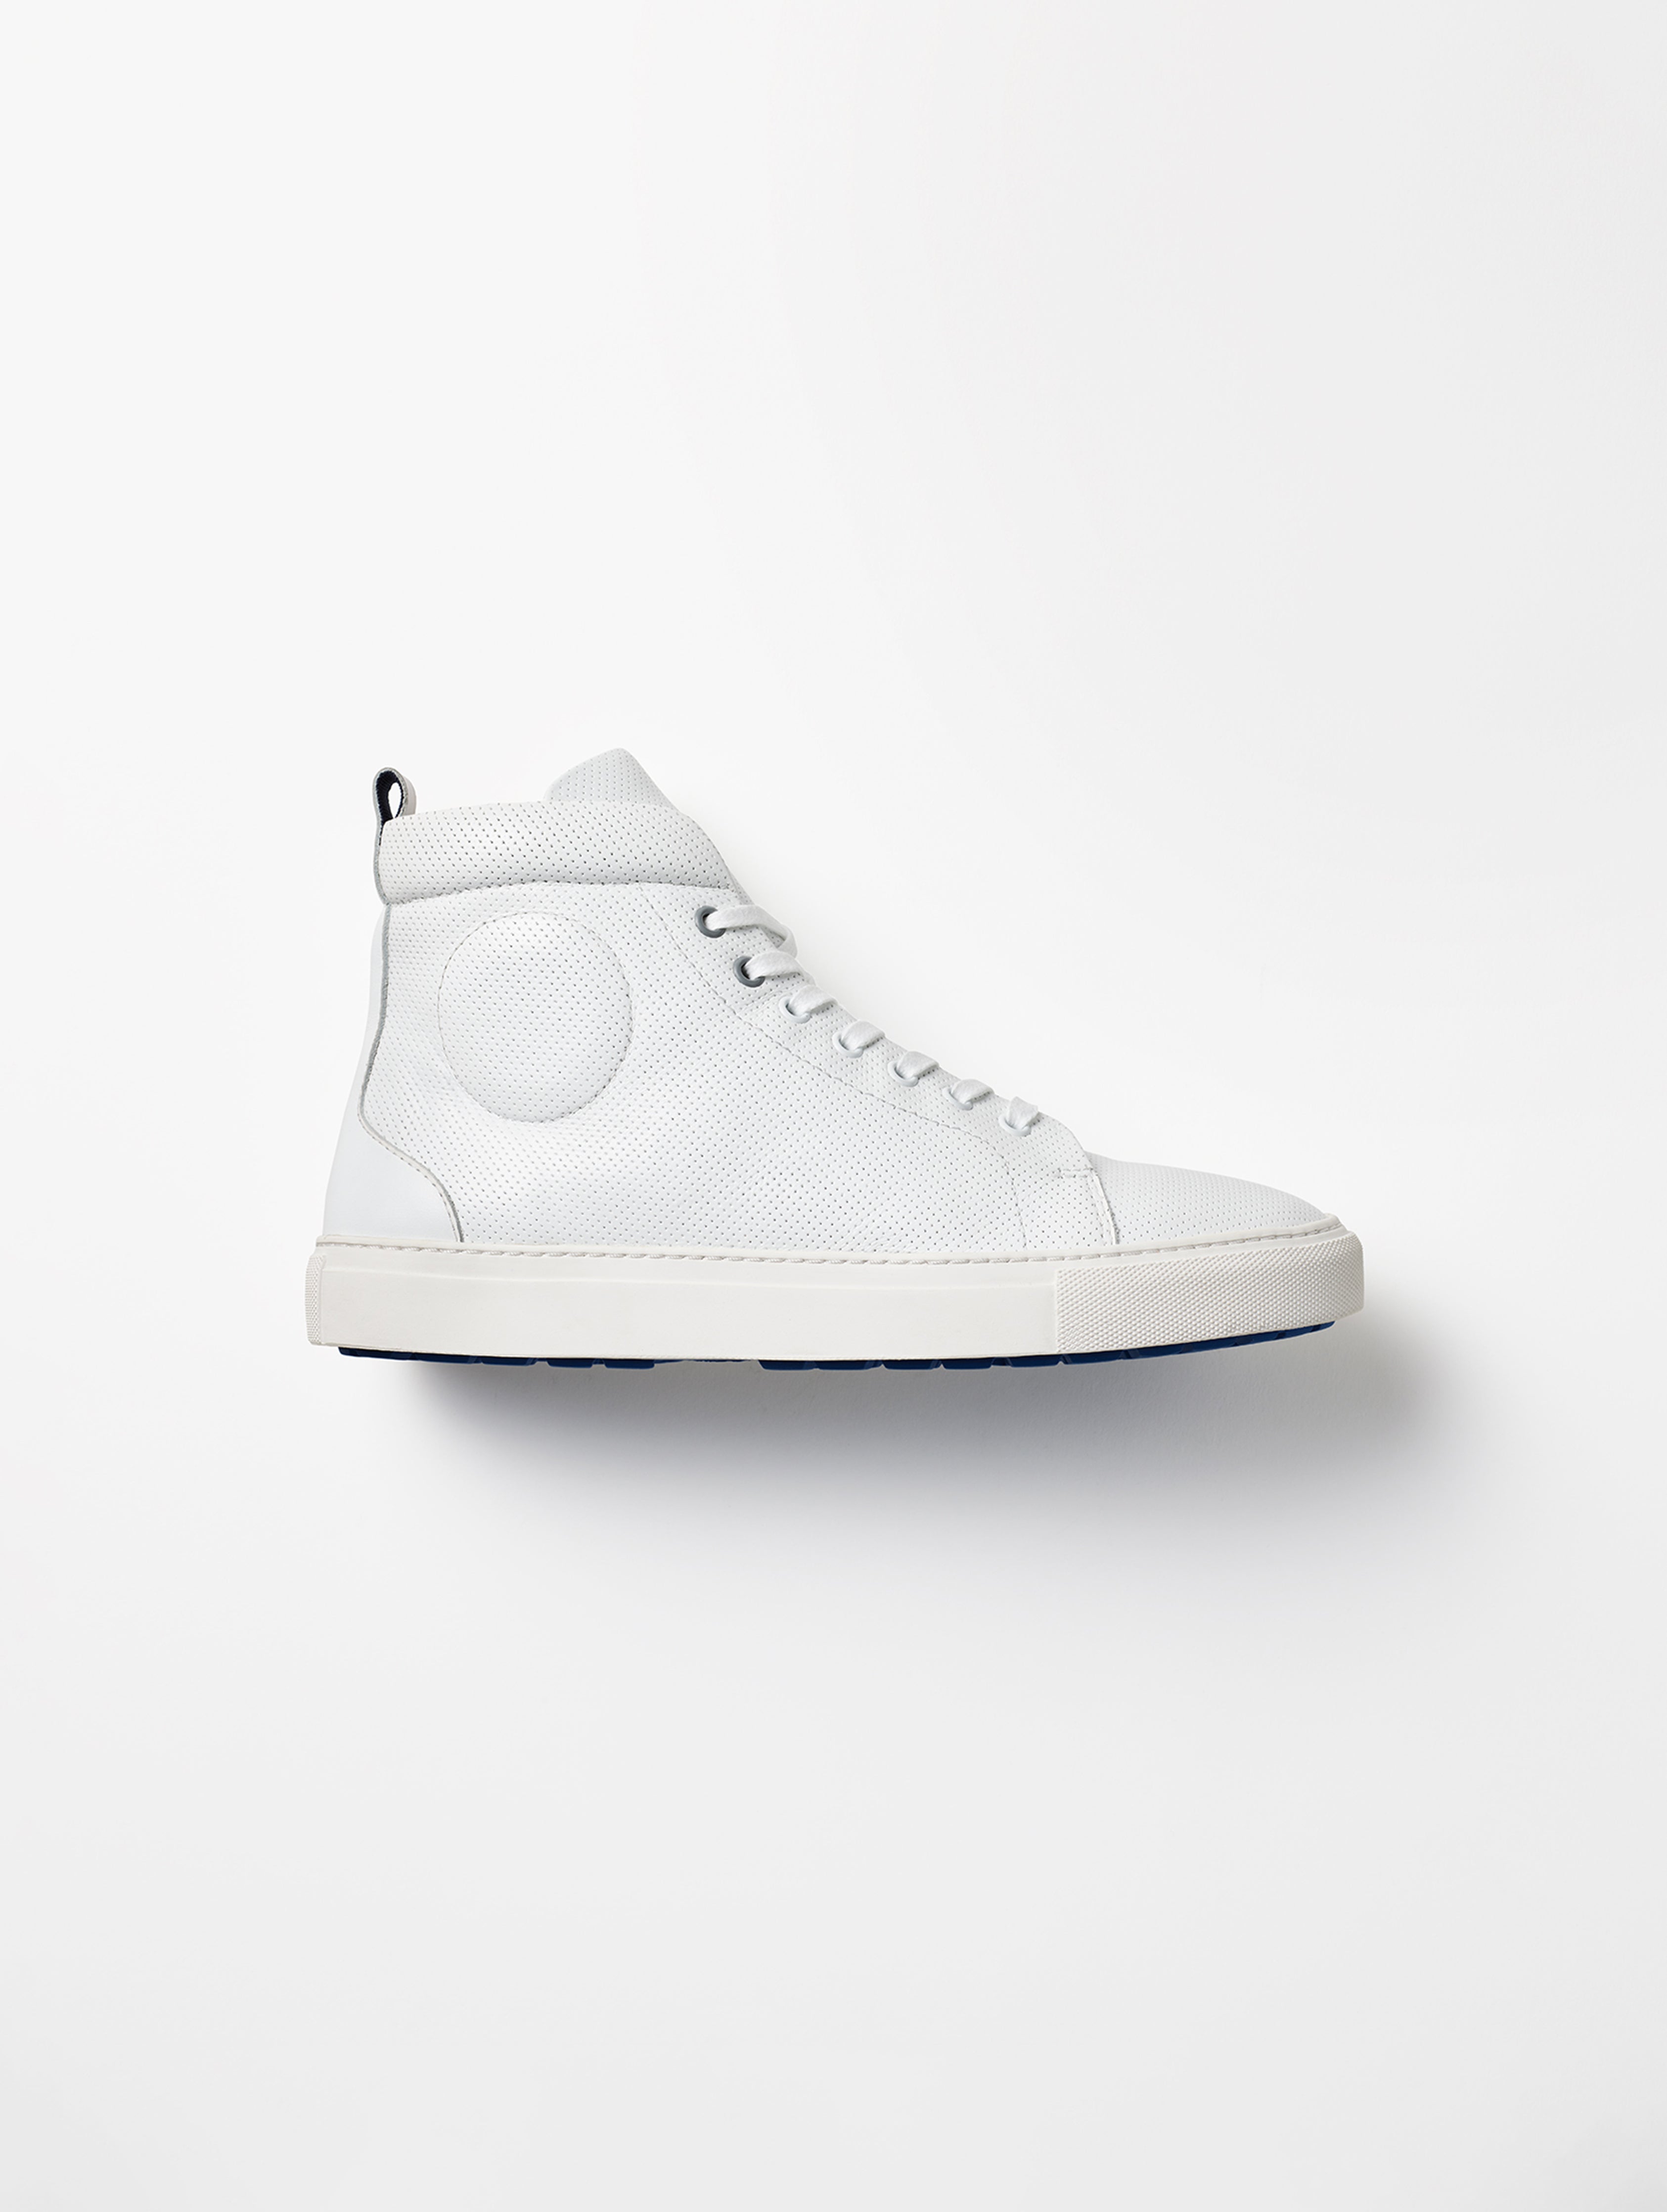 Versace White Leather High Top Sneakers for Men Online India at Darveys.com